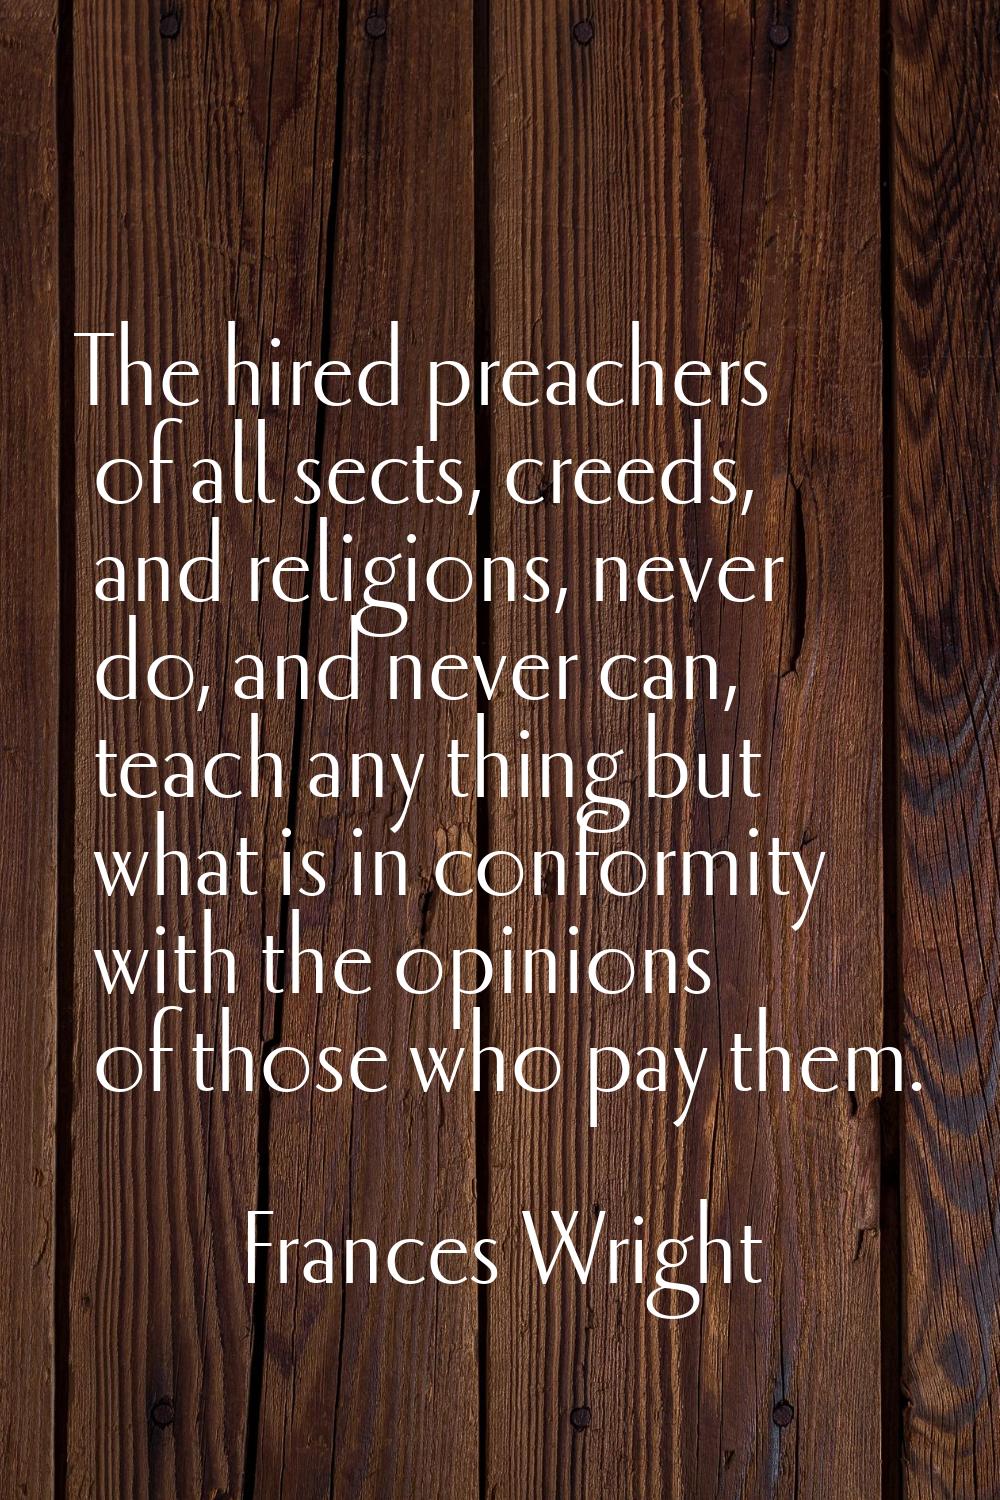 The hired preachers of all sects, creeds, and religions, never do, and never can, teach any thing b